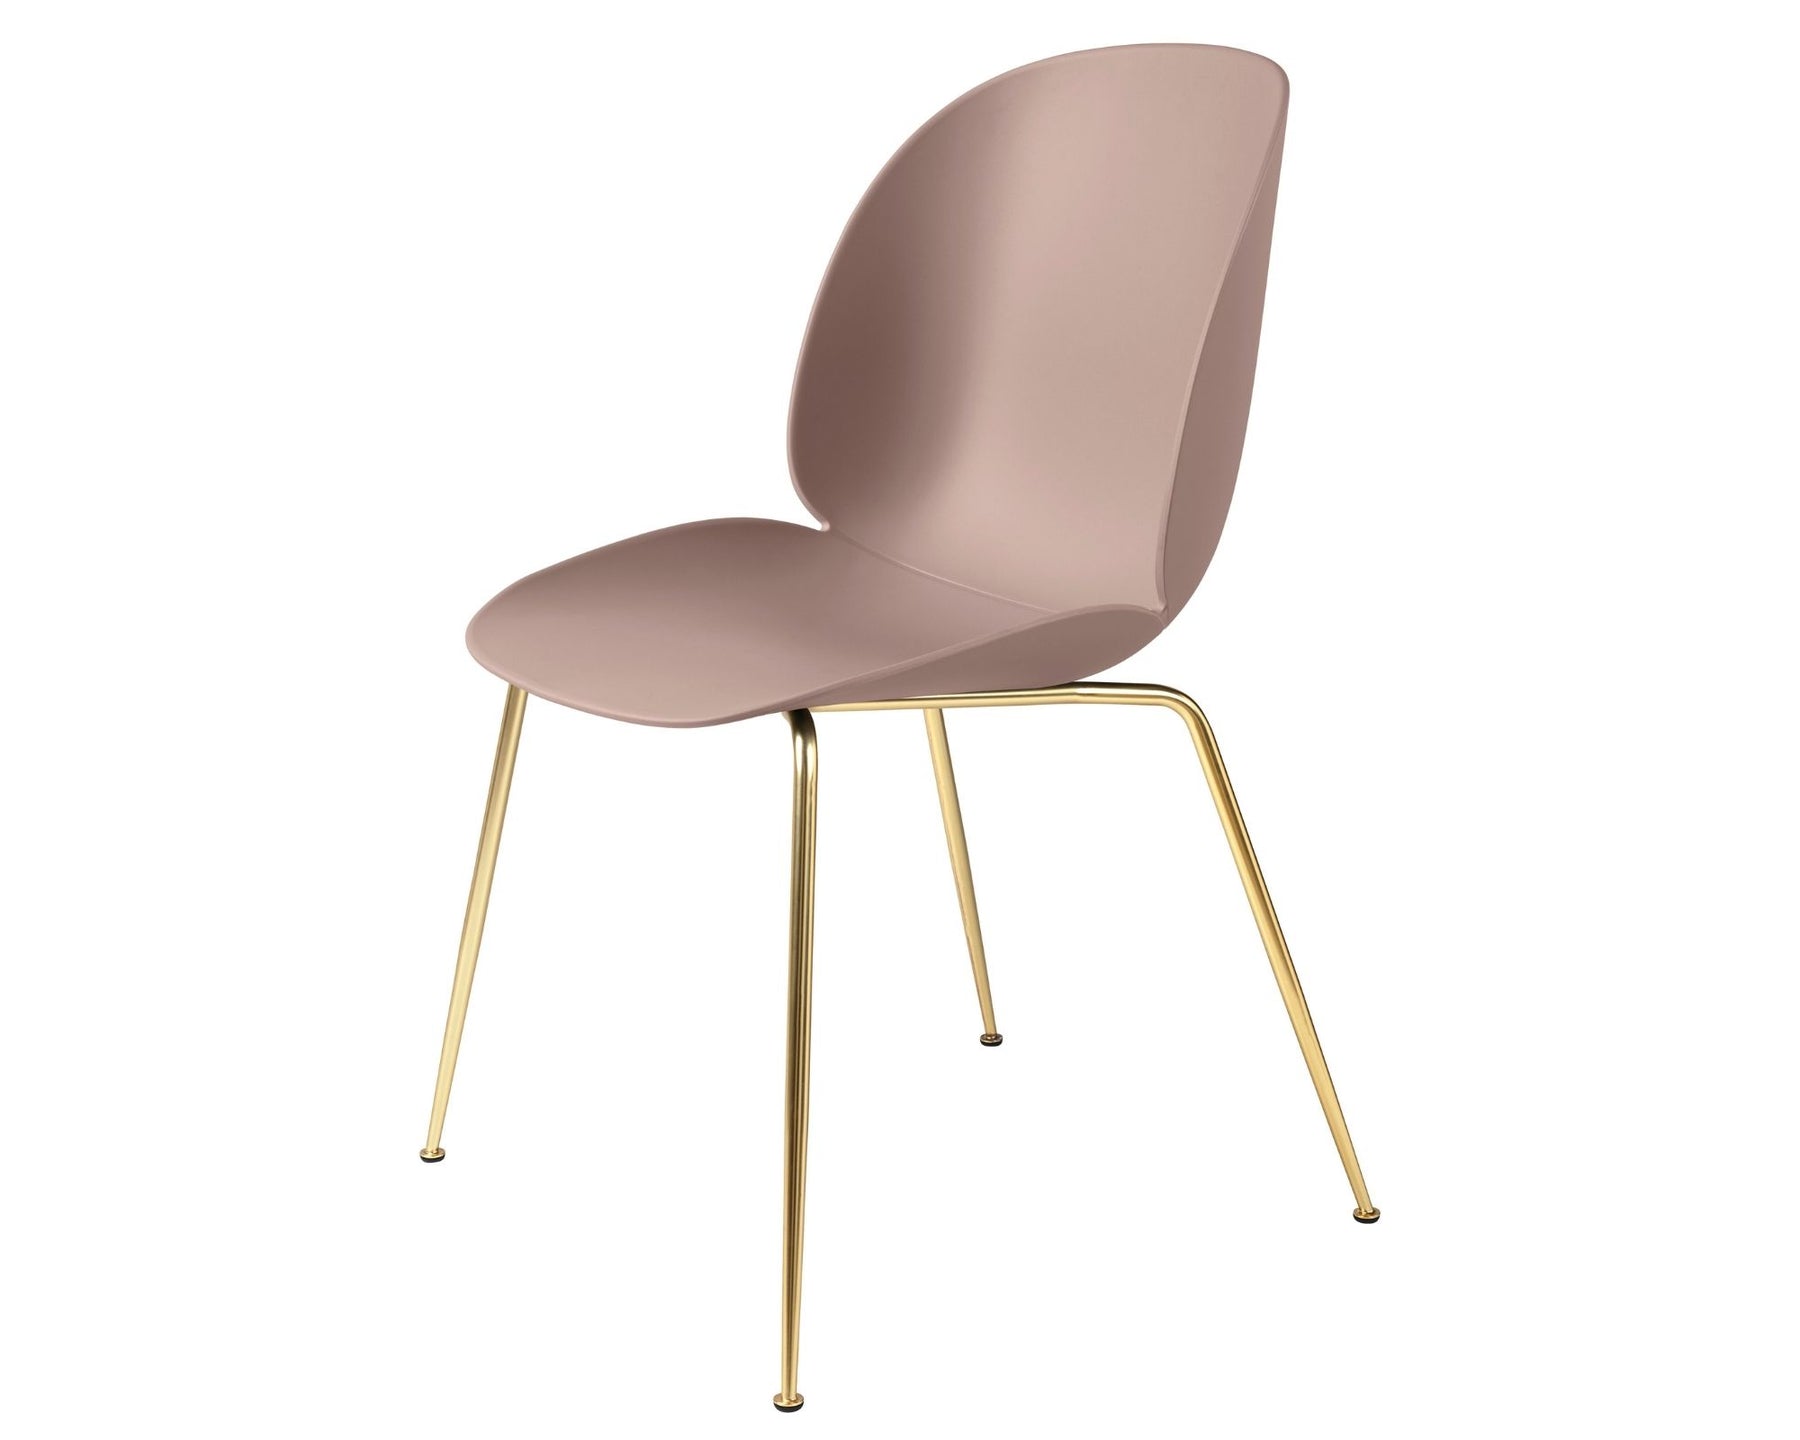 Sweet Pink Dining Chair with Brass Base | DSHOP